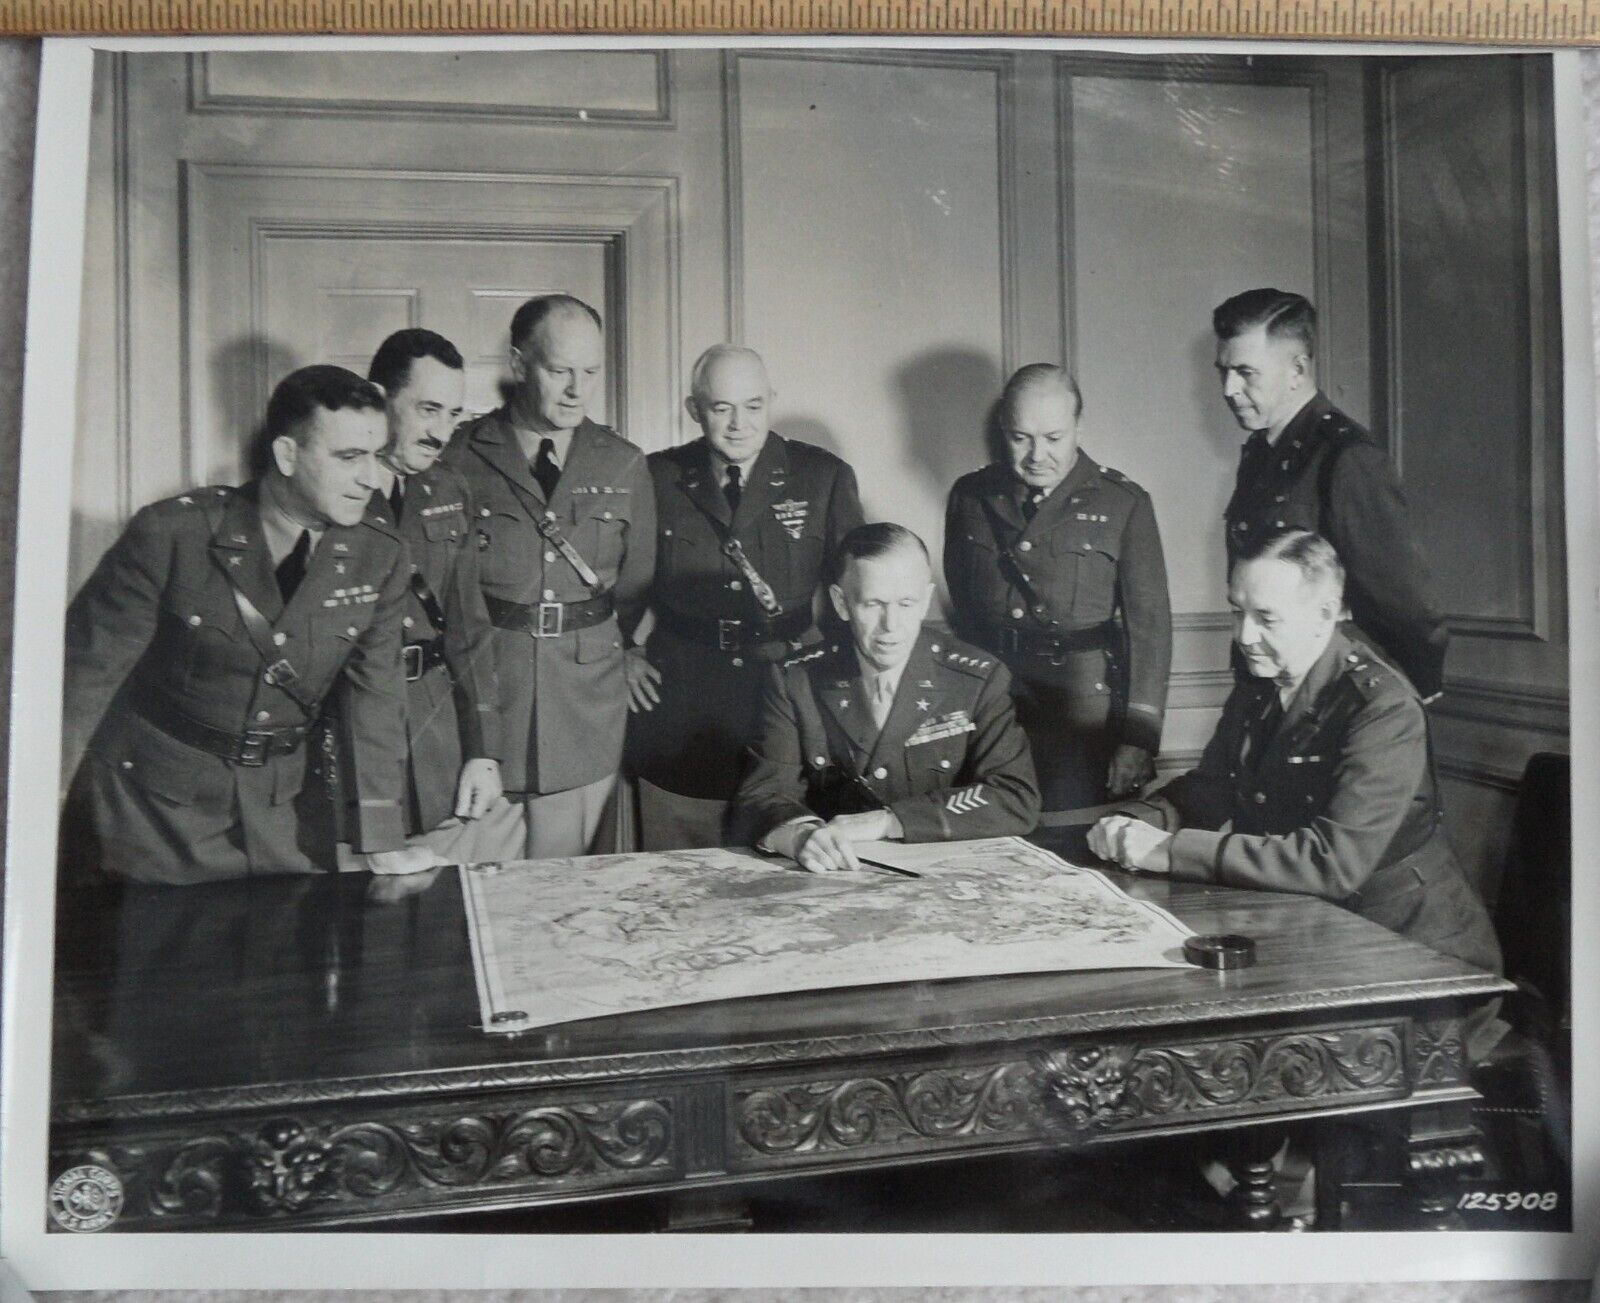 Gen George Marshall & Top Brass Peer at Map at HQ WWII Army Signal Corps Photo